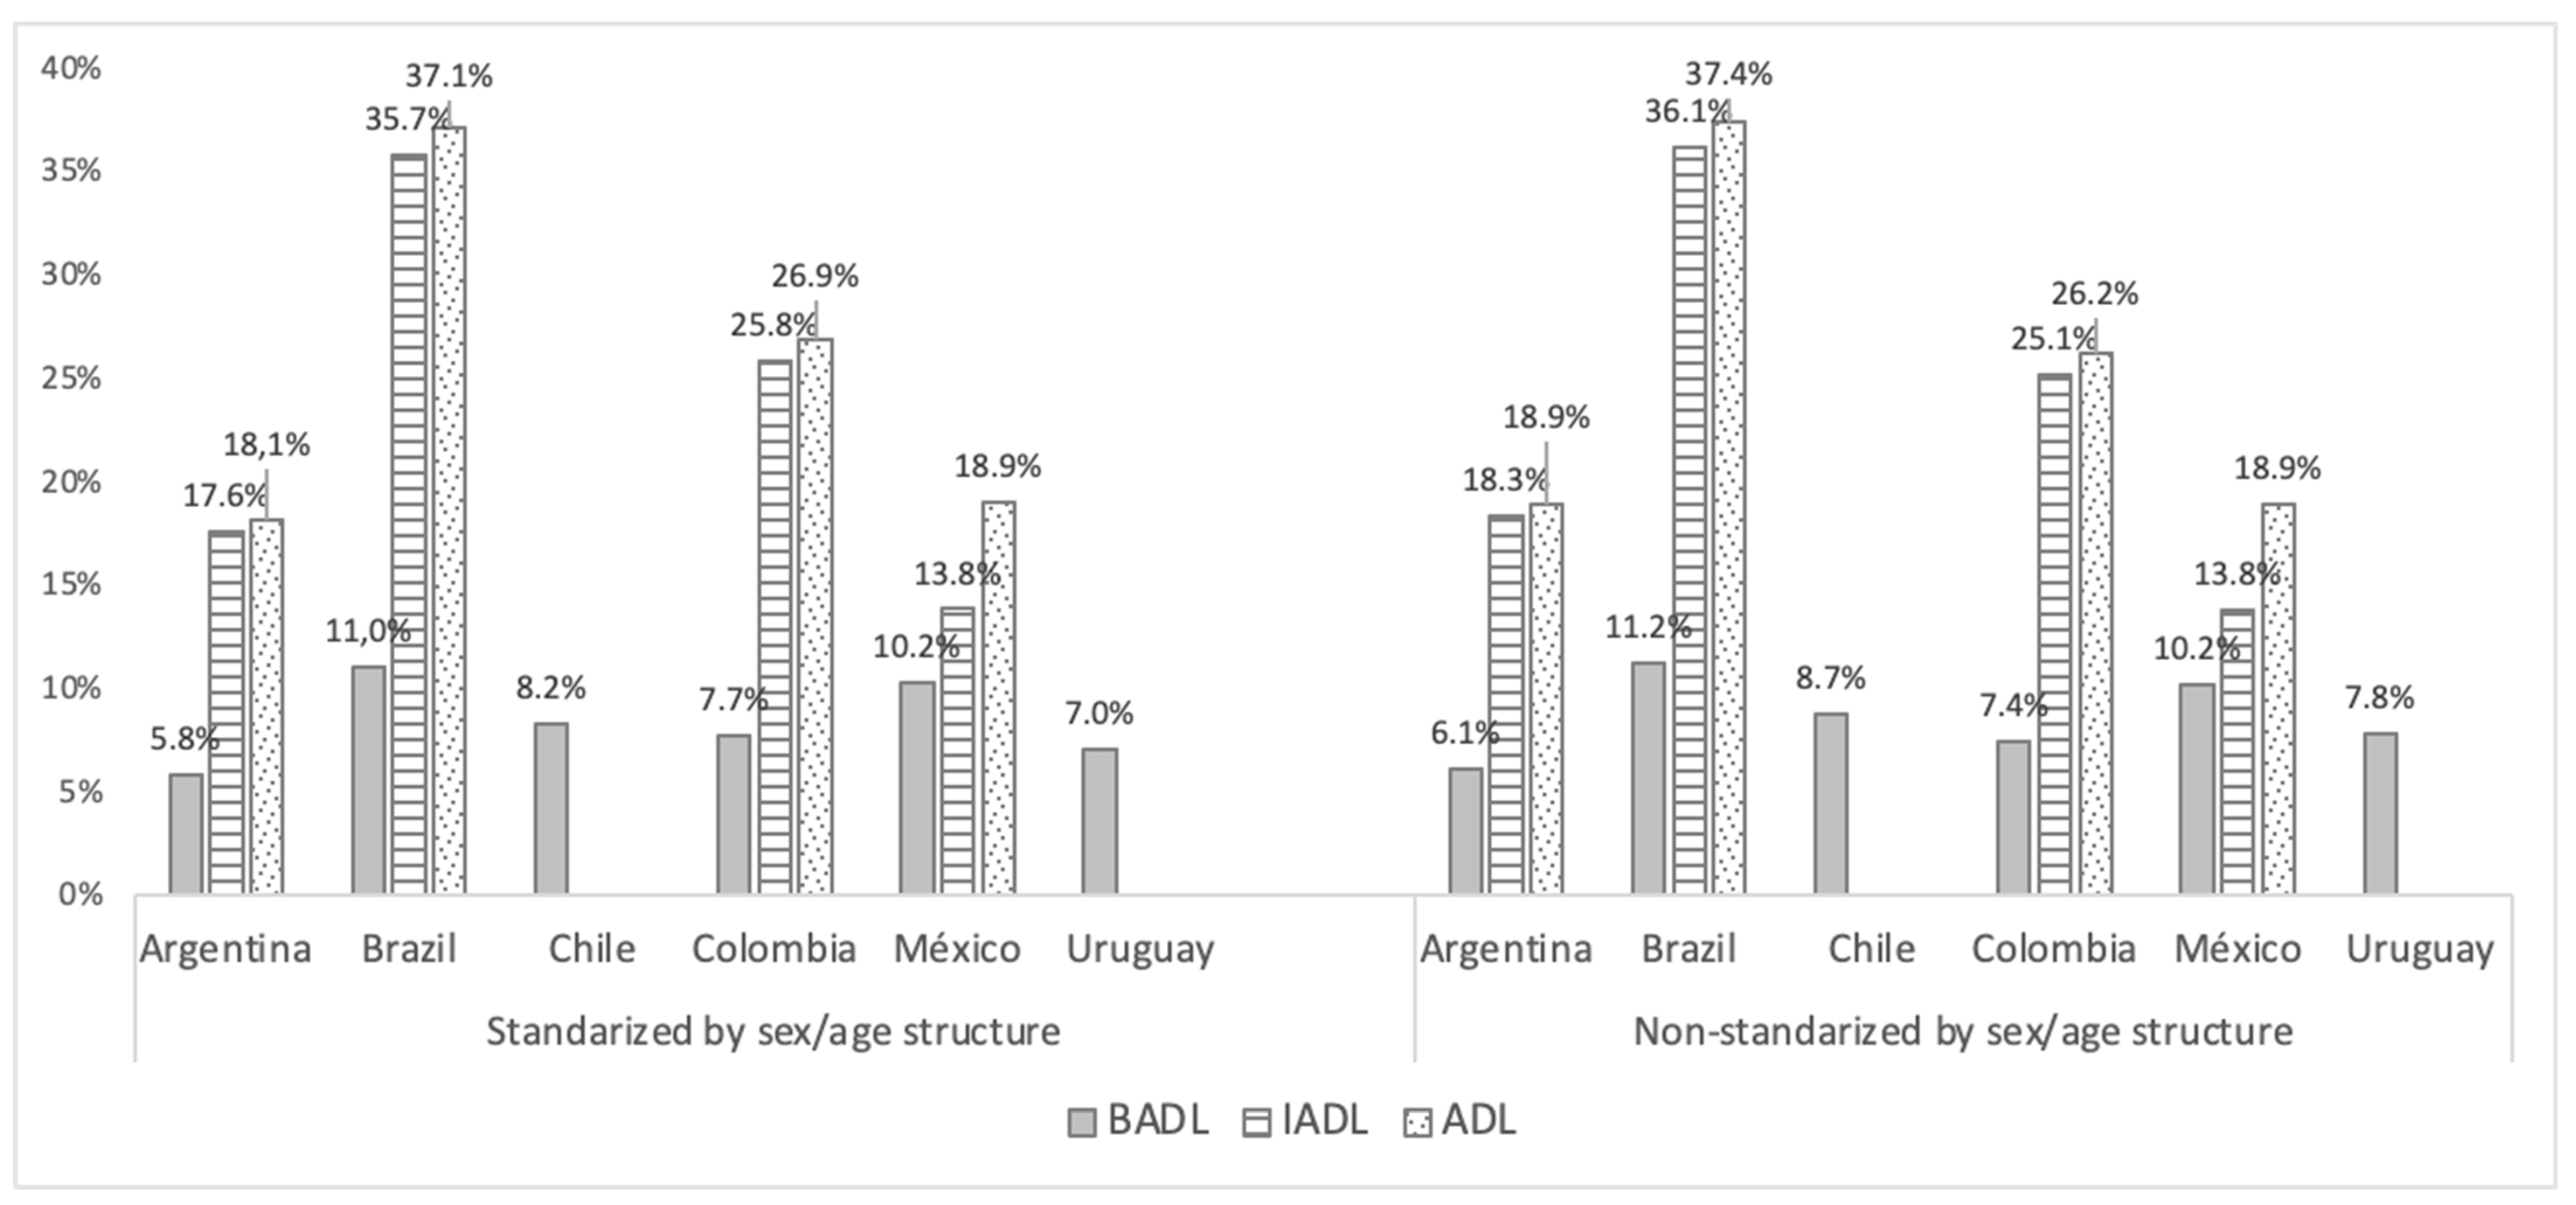 PDF) Differences in quality of life among older adults in Brazil